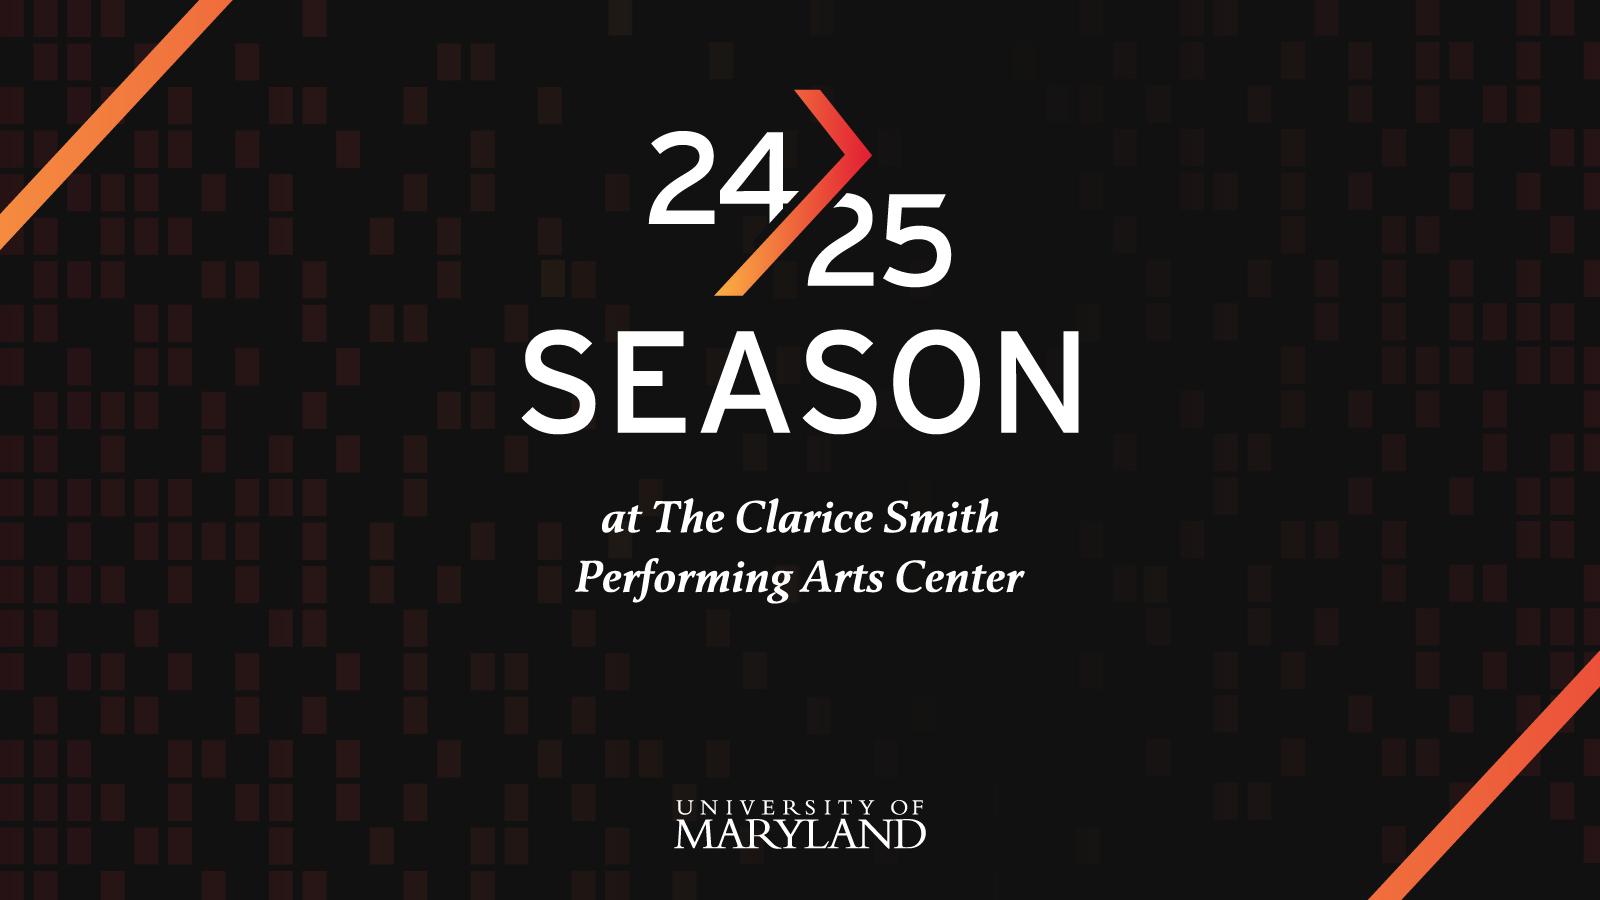 24-25 Season at The Clarice Smith Performing Arts Center.